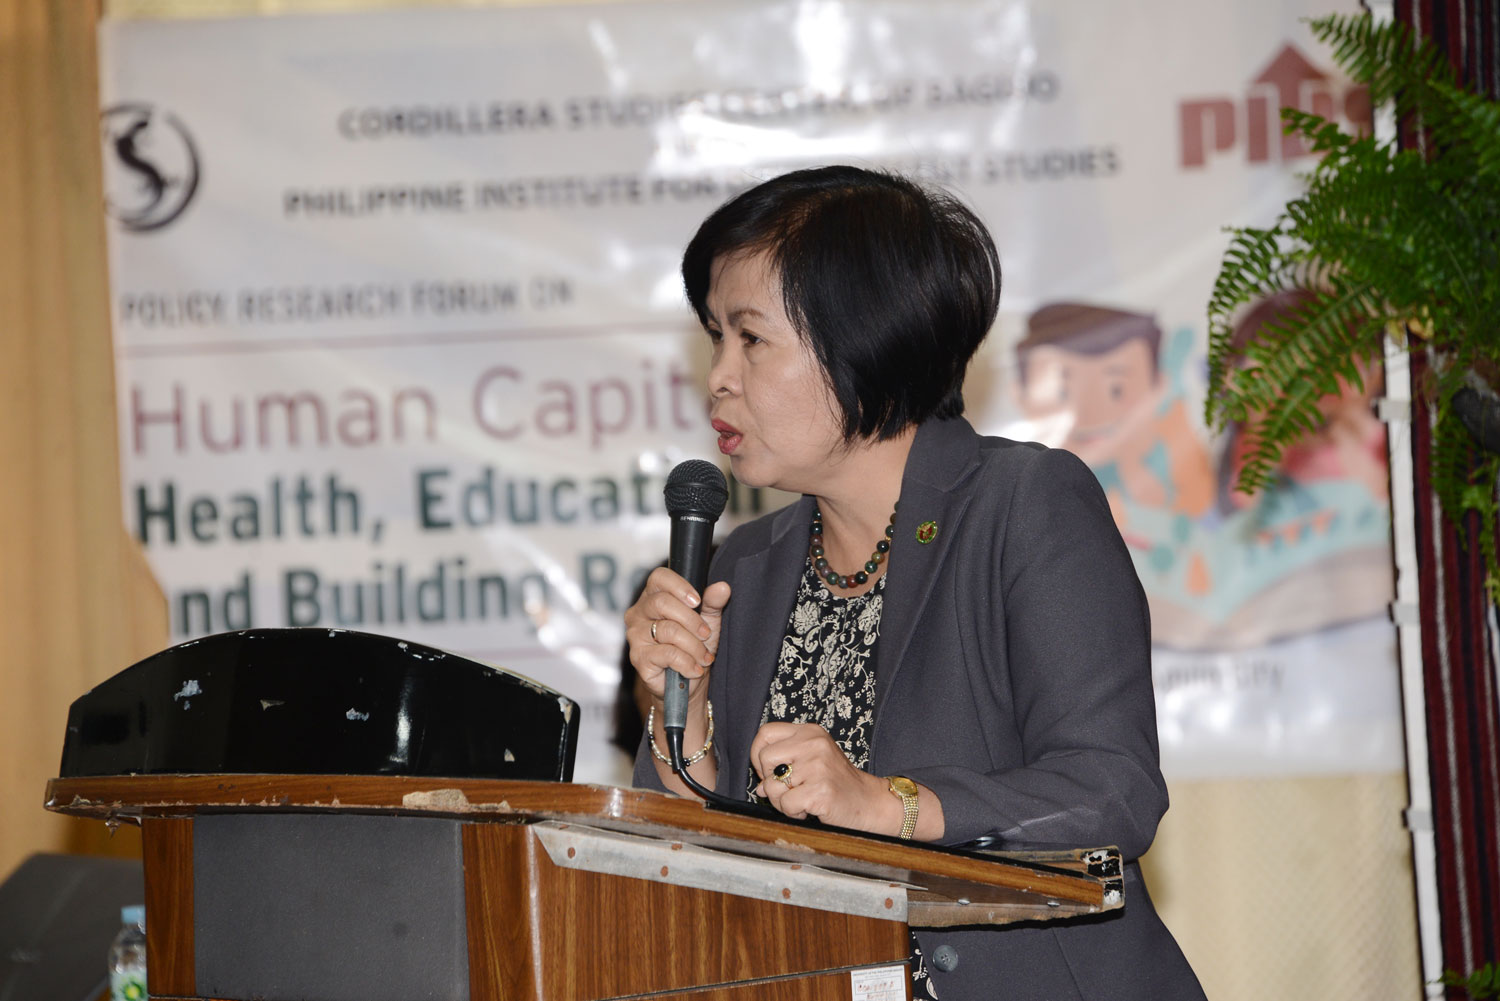 Policy Research Forum on Human Capital: Health, Education, and Building Resilience-DSC_6090.jpg